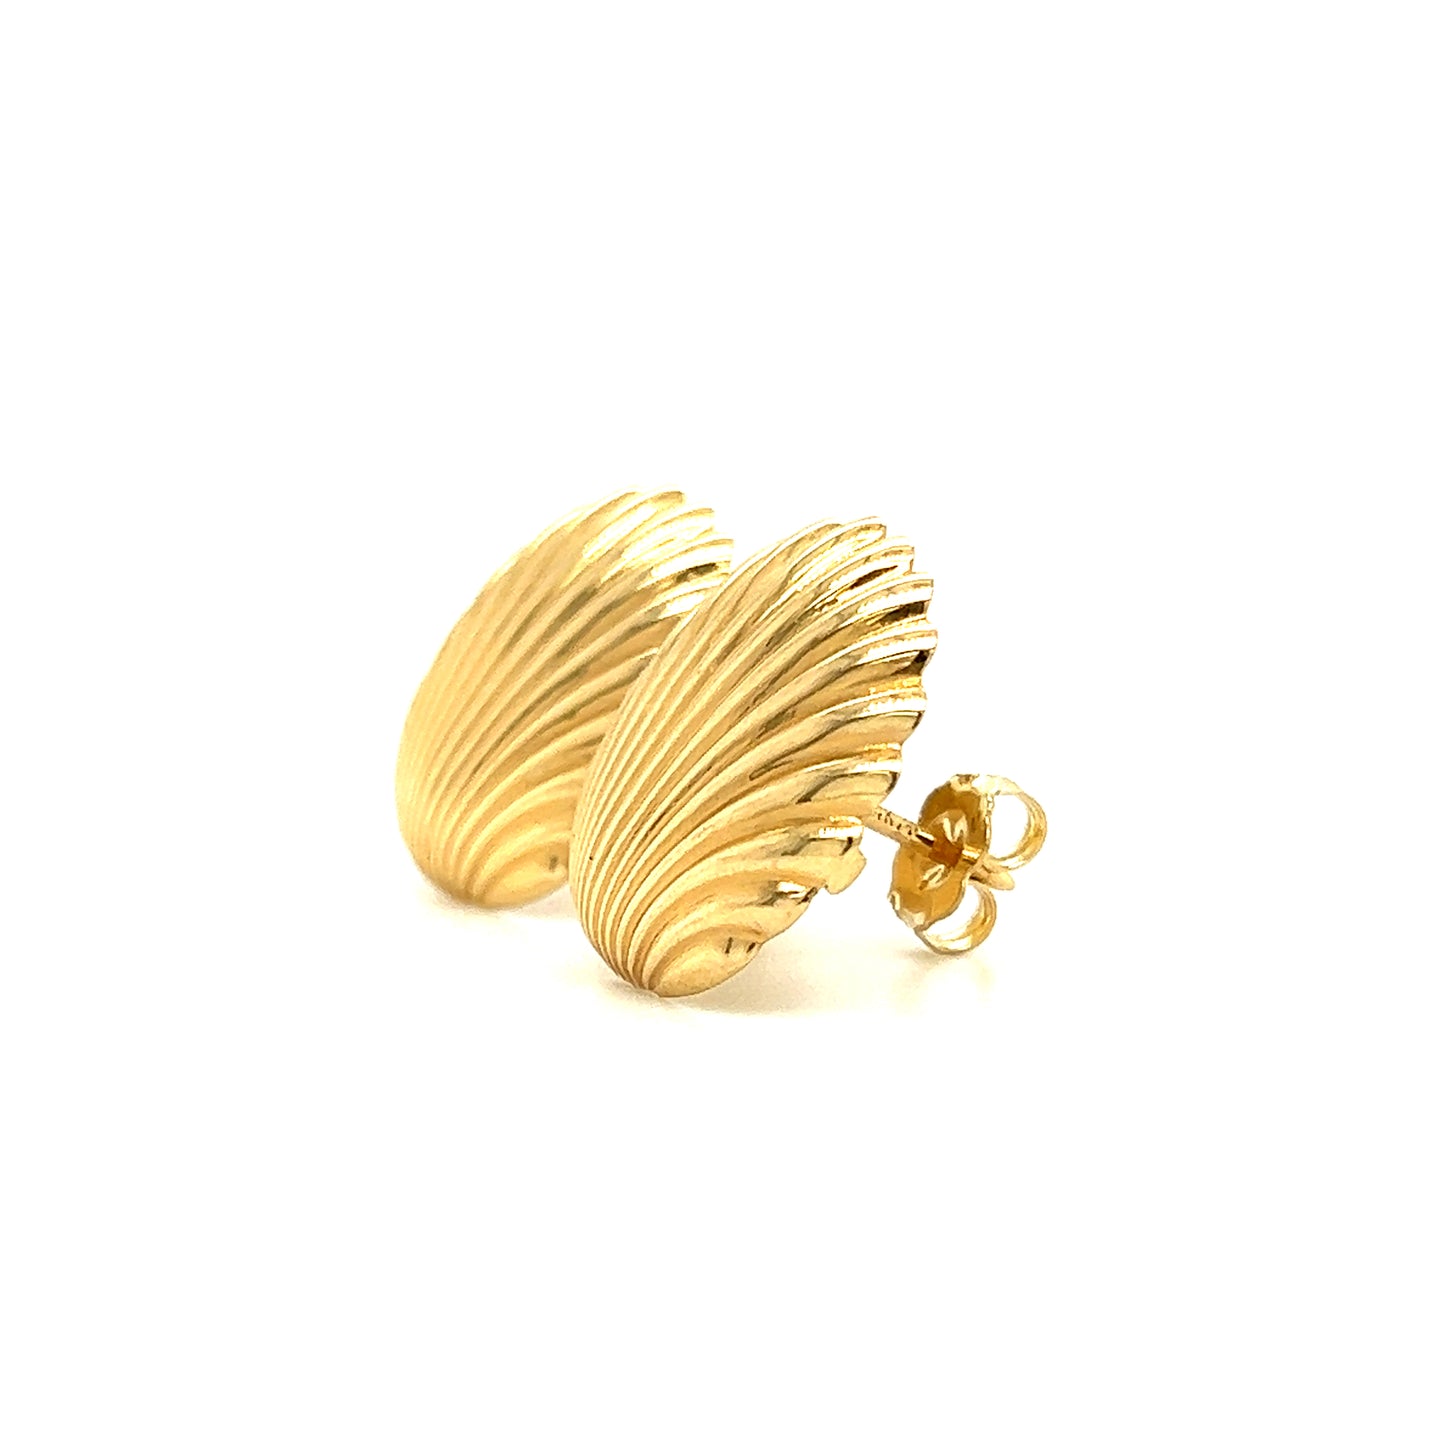 Scallop Post Earrings in 14K Yellow GoldRight Size View